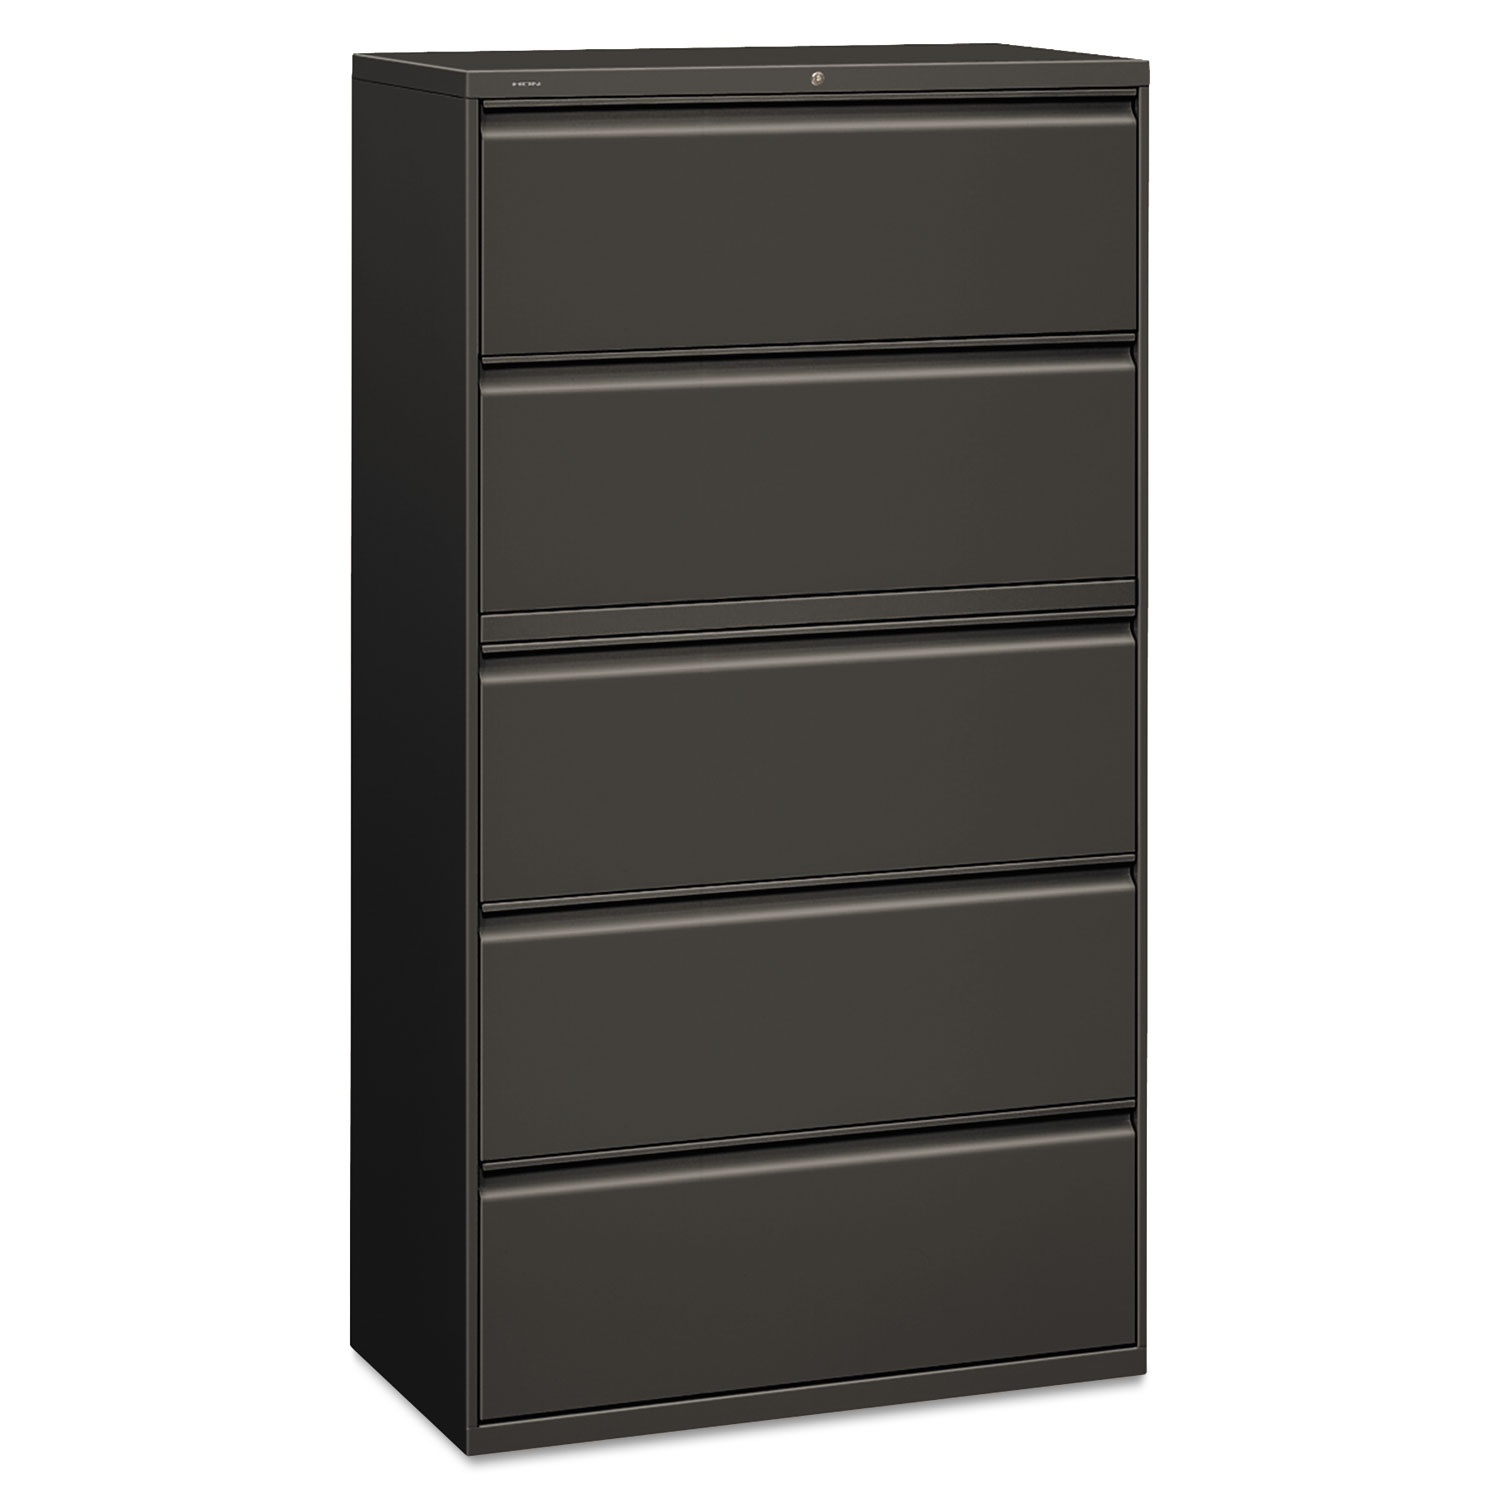 800 Series Five-Drawer Lateral File, Roll-Out/Posting Shelves, 36w x 67h, Charcl